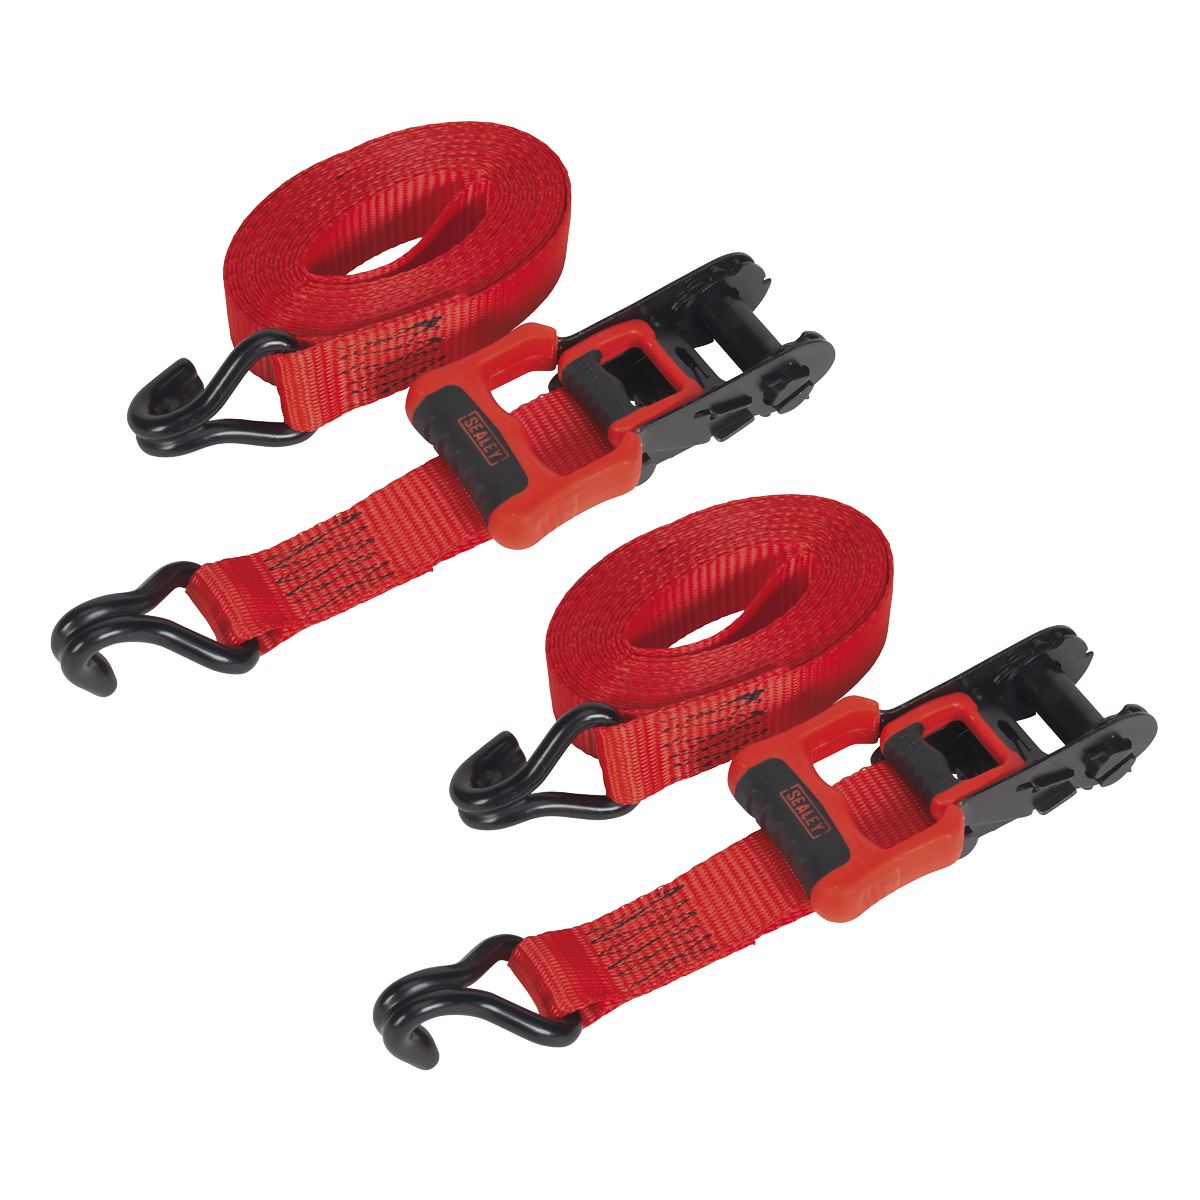 Sealey Ratchet Straps 32mm x 4.9m Polyester Webbing with J-Hooks 1200kg Breaking Strength - 2 Pairs